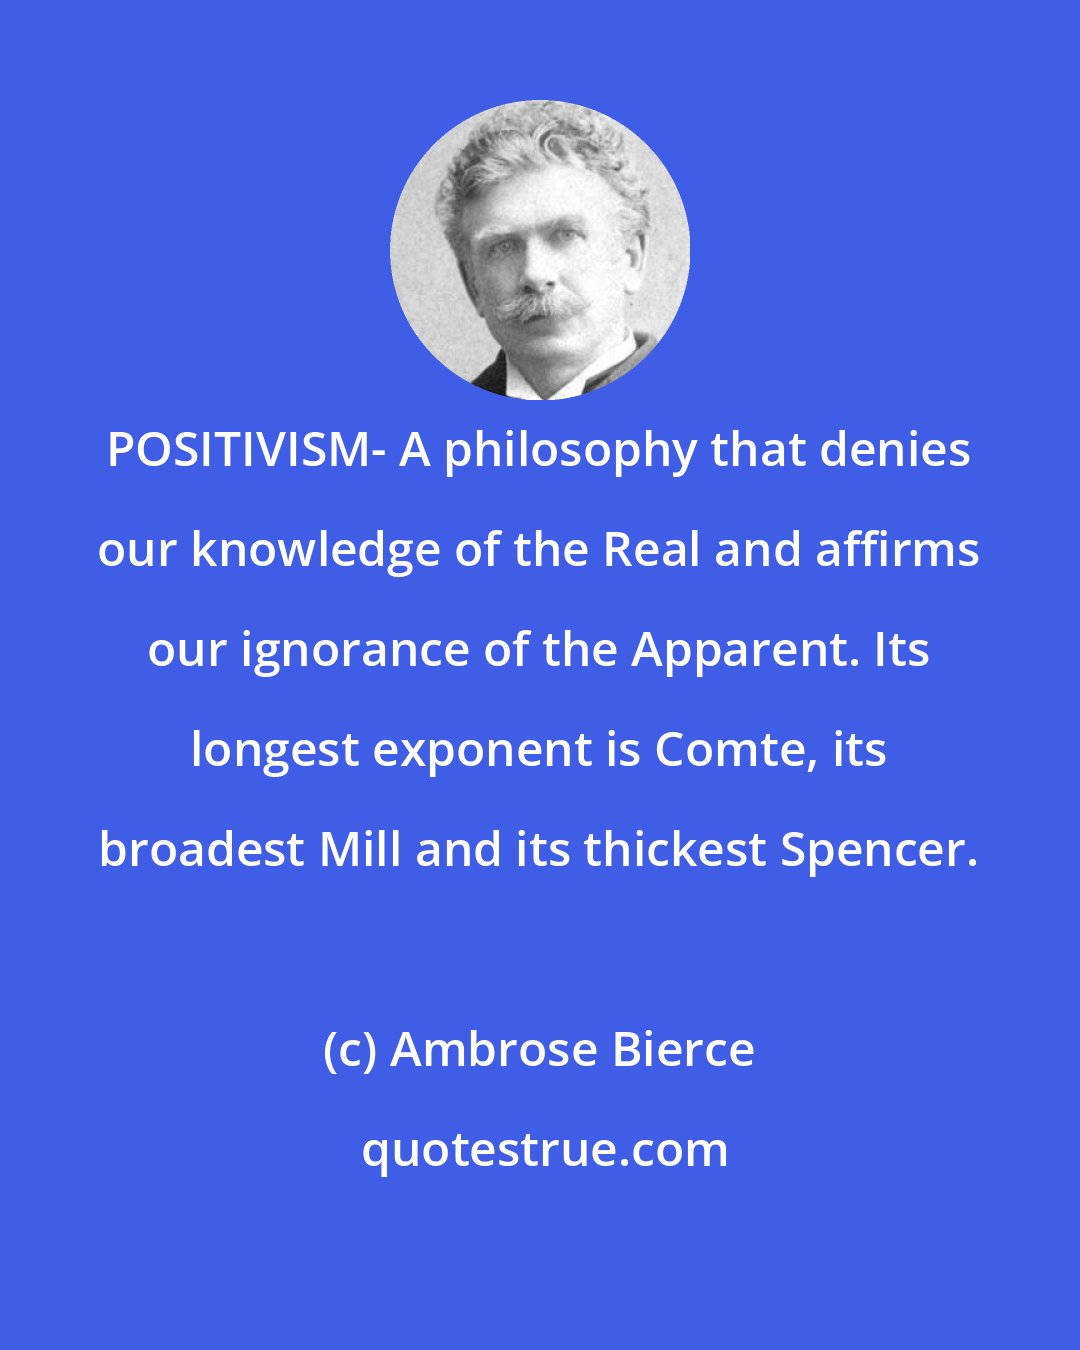 Ambrose Bierce: POSITIVISM- A philosophy that denies our knowledge of the Real and affirms our ignorance of the Apparent. Its longest exponent is Comte, its broadest Mill and its thickest Spencer.